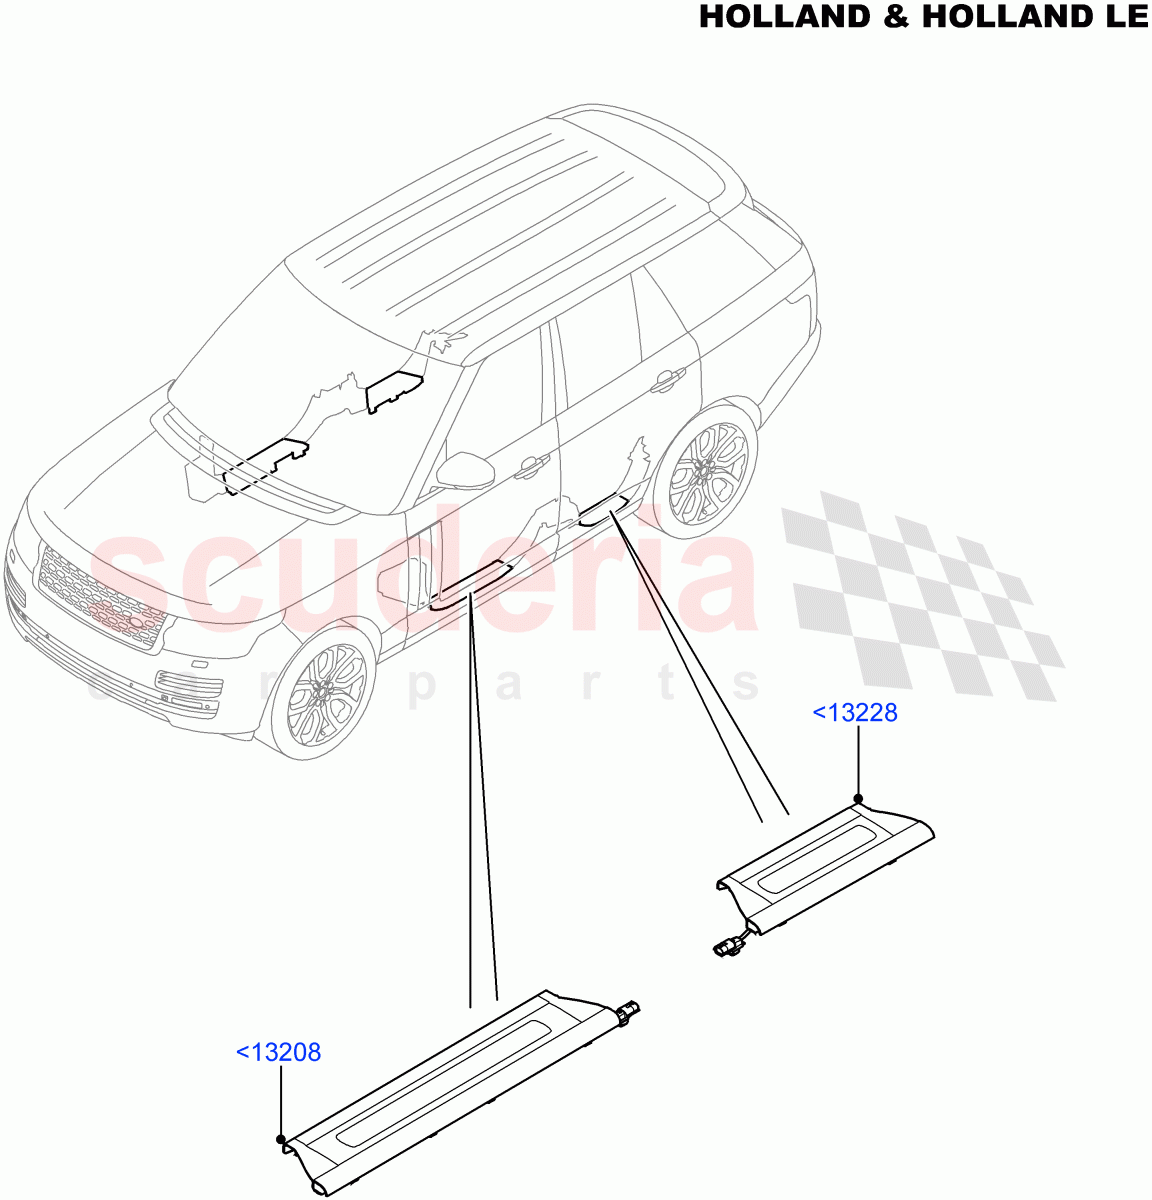 Side Trim(Holland & Holland LE, Sill)(Console Deployable Tables)((V)FROMFA000001) of Land Rover Land Rover Range Rover (2012-2021) [5.0 OHC SGDI SC V8 Petrol]